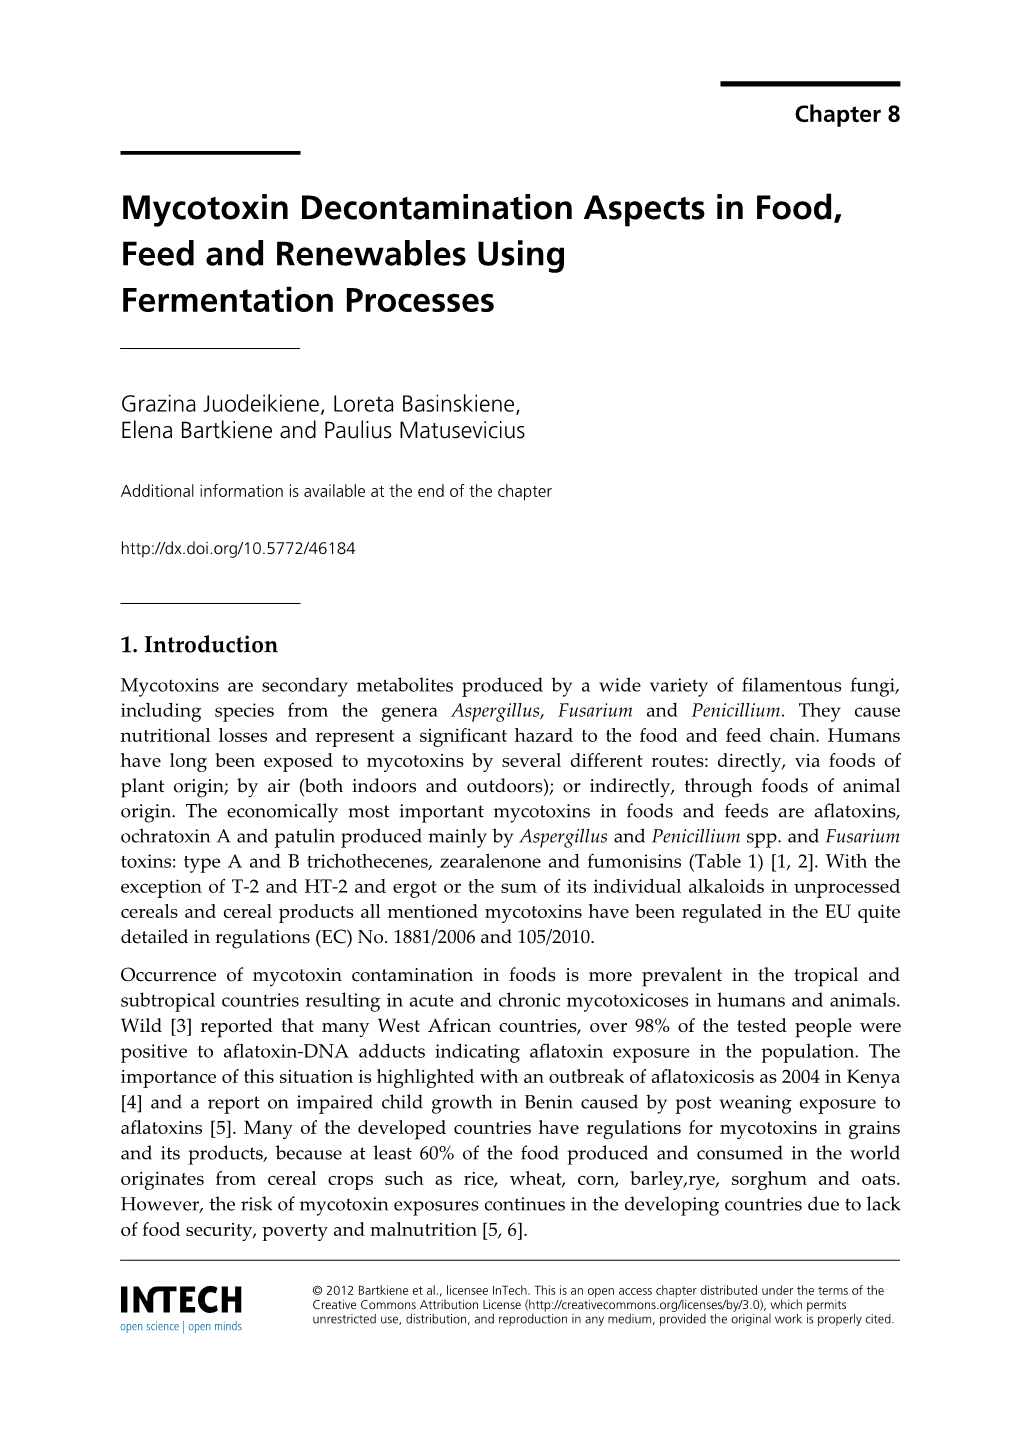 Mycotoxin Decontamination Aspects in Food, Feed and Renewables Using Fermentation Processes